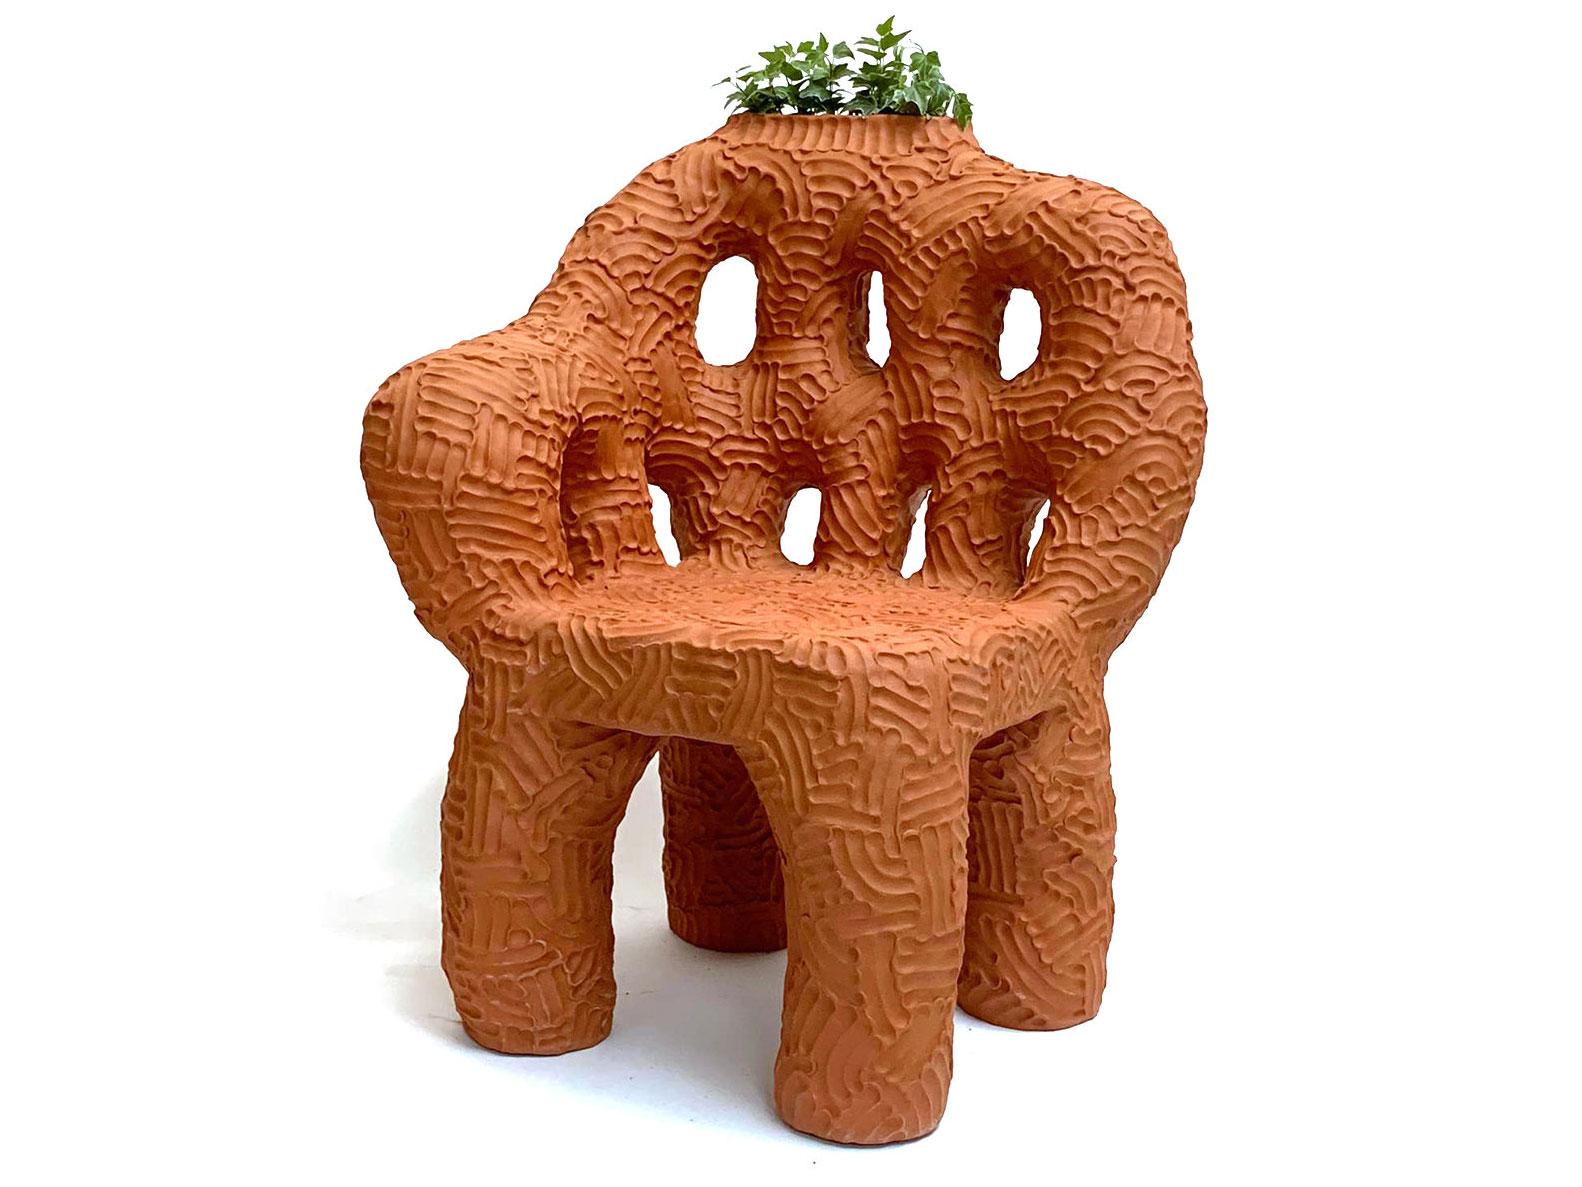 Terracotta indoor/outdoor planter chair, handmade by New York and Medellín-based artist Chris Wolston. One currently available, additional can be made to order with a lead time of 12-14 weeks.